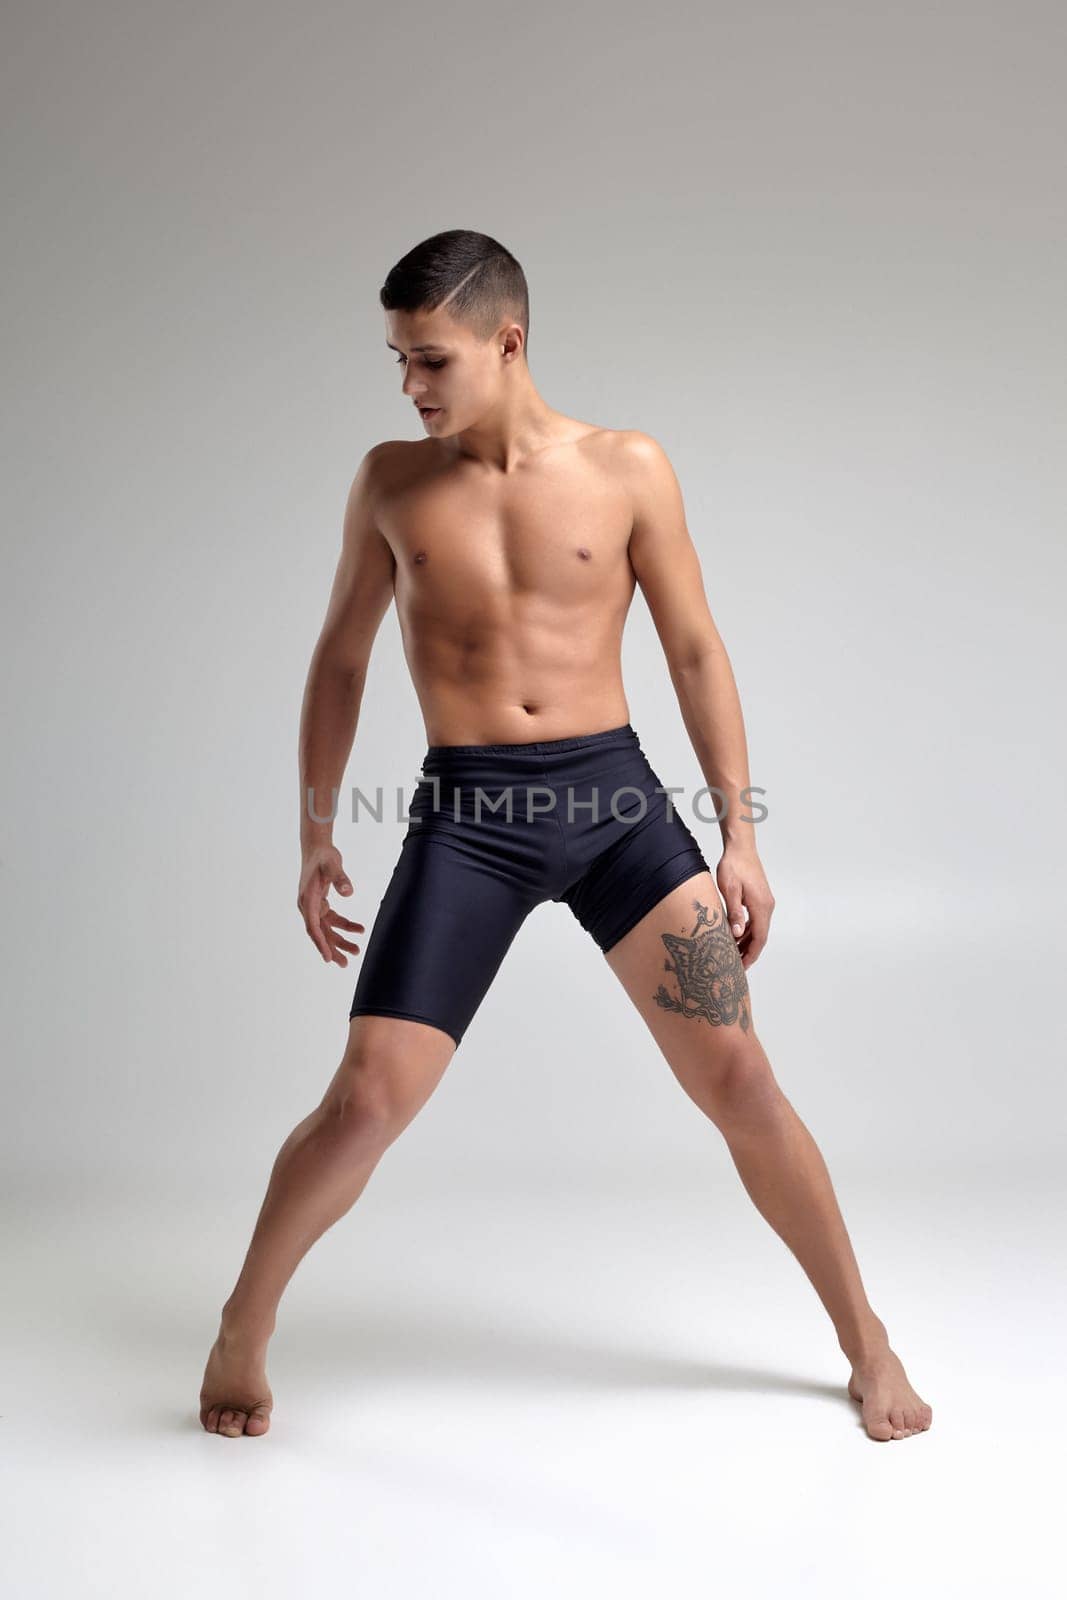 Full length portrait of a handsome muscular man ballet dancer, dressed in a black shorts. He is making a dance element against a gray background in studio. Bare legs and torso. Ballet and contemporary choreography concept. Art photo.